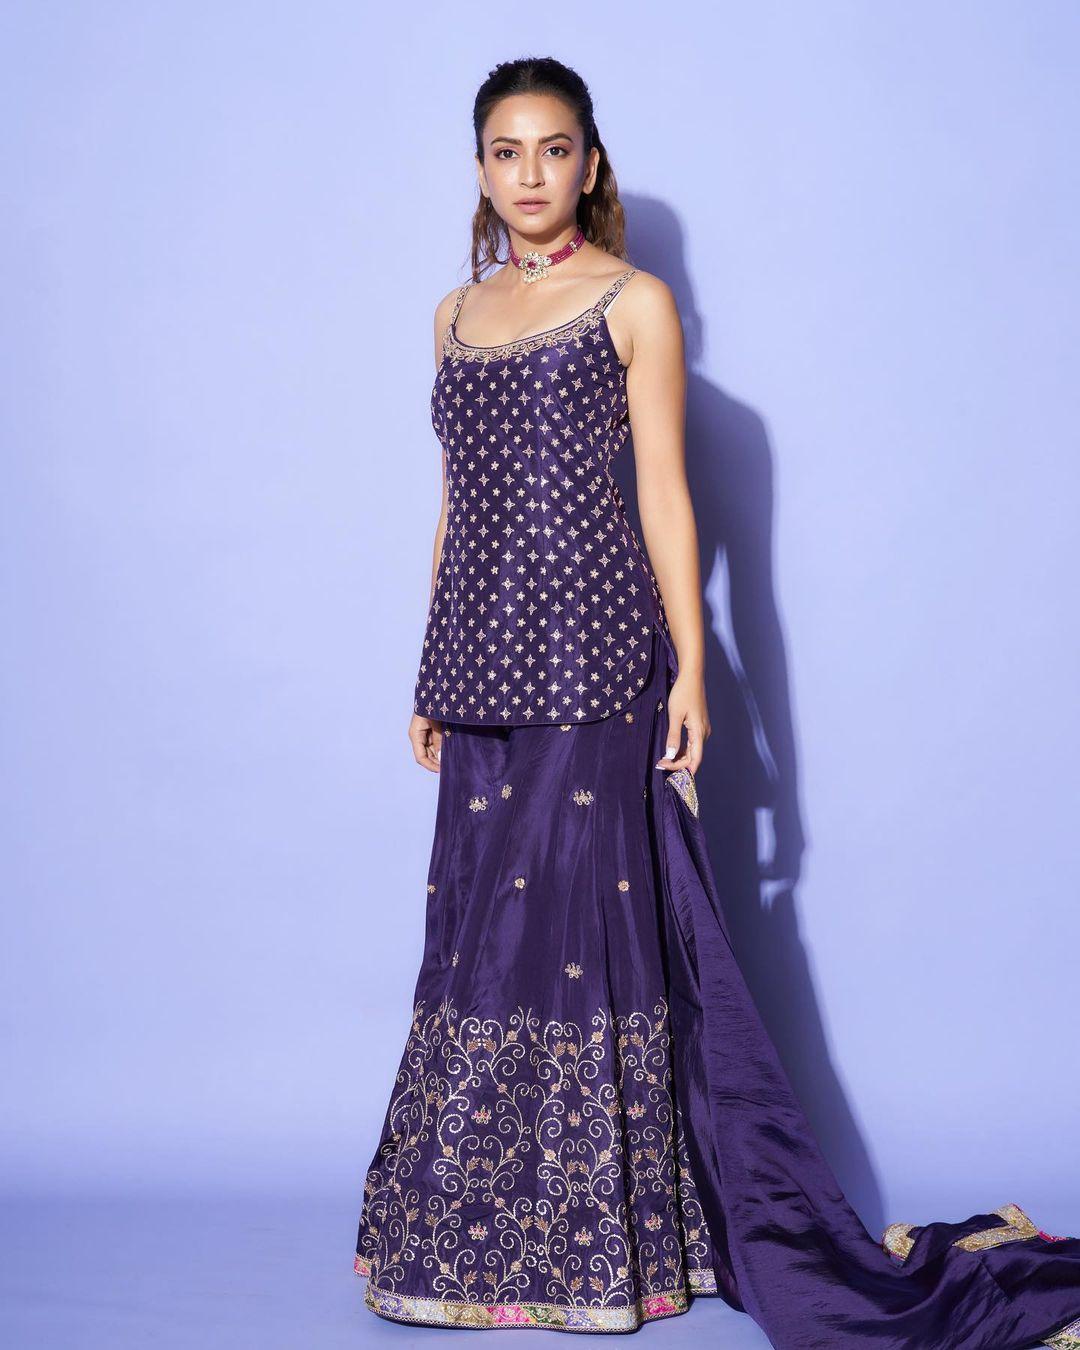 Ethnice are often our best friends during the festive season, but many times we are left confused because we can't find the best inspiration. In this look, Kriti opted for a purple kurta and paired it with matching skirt and dupatta